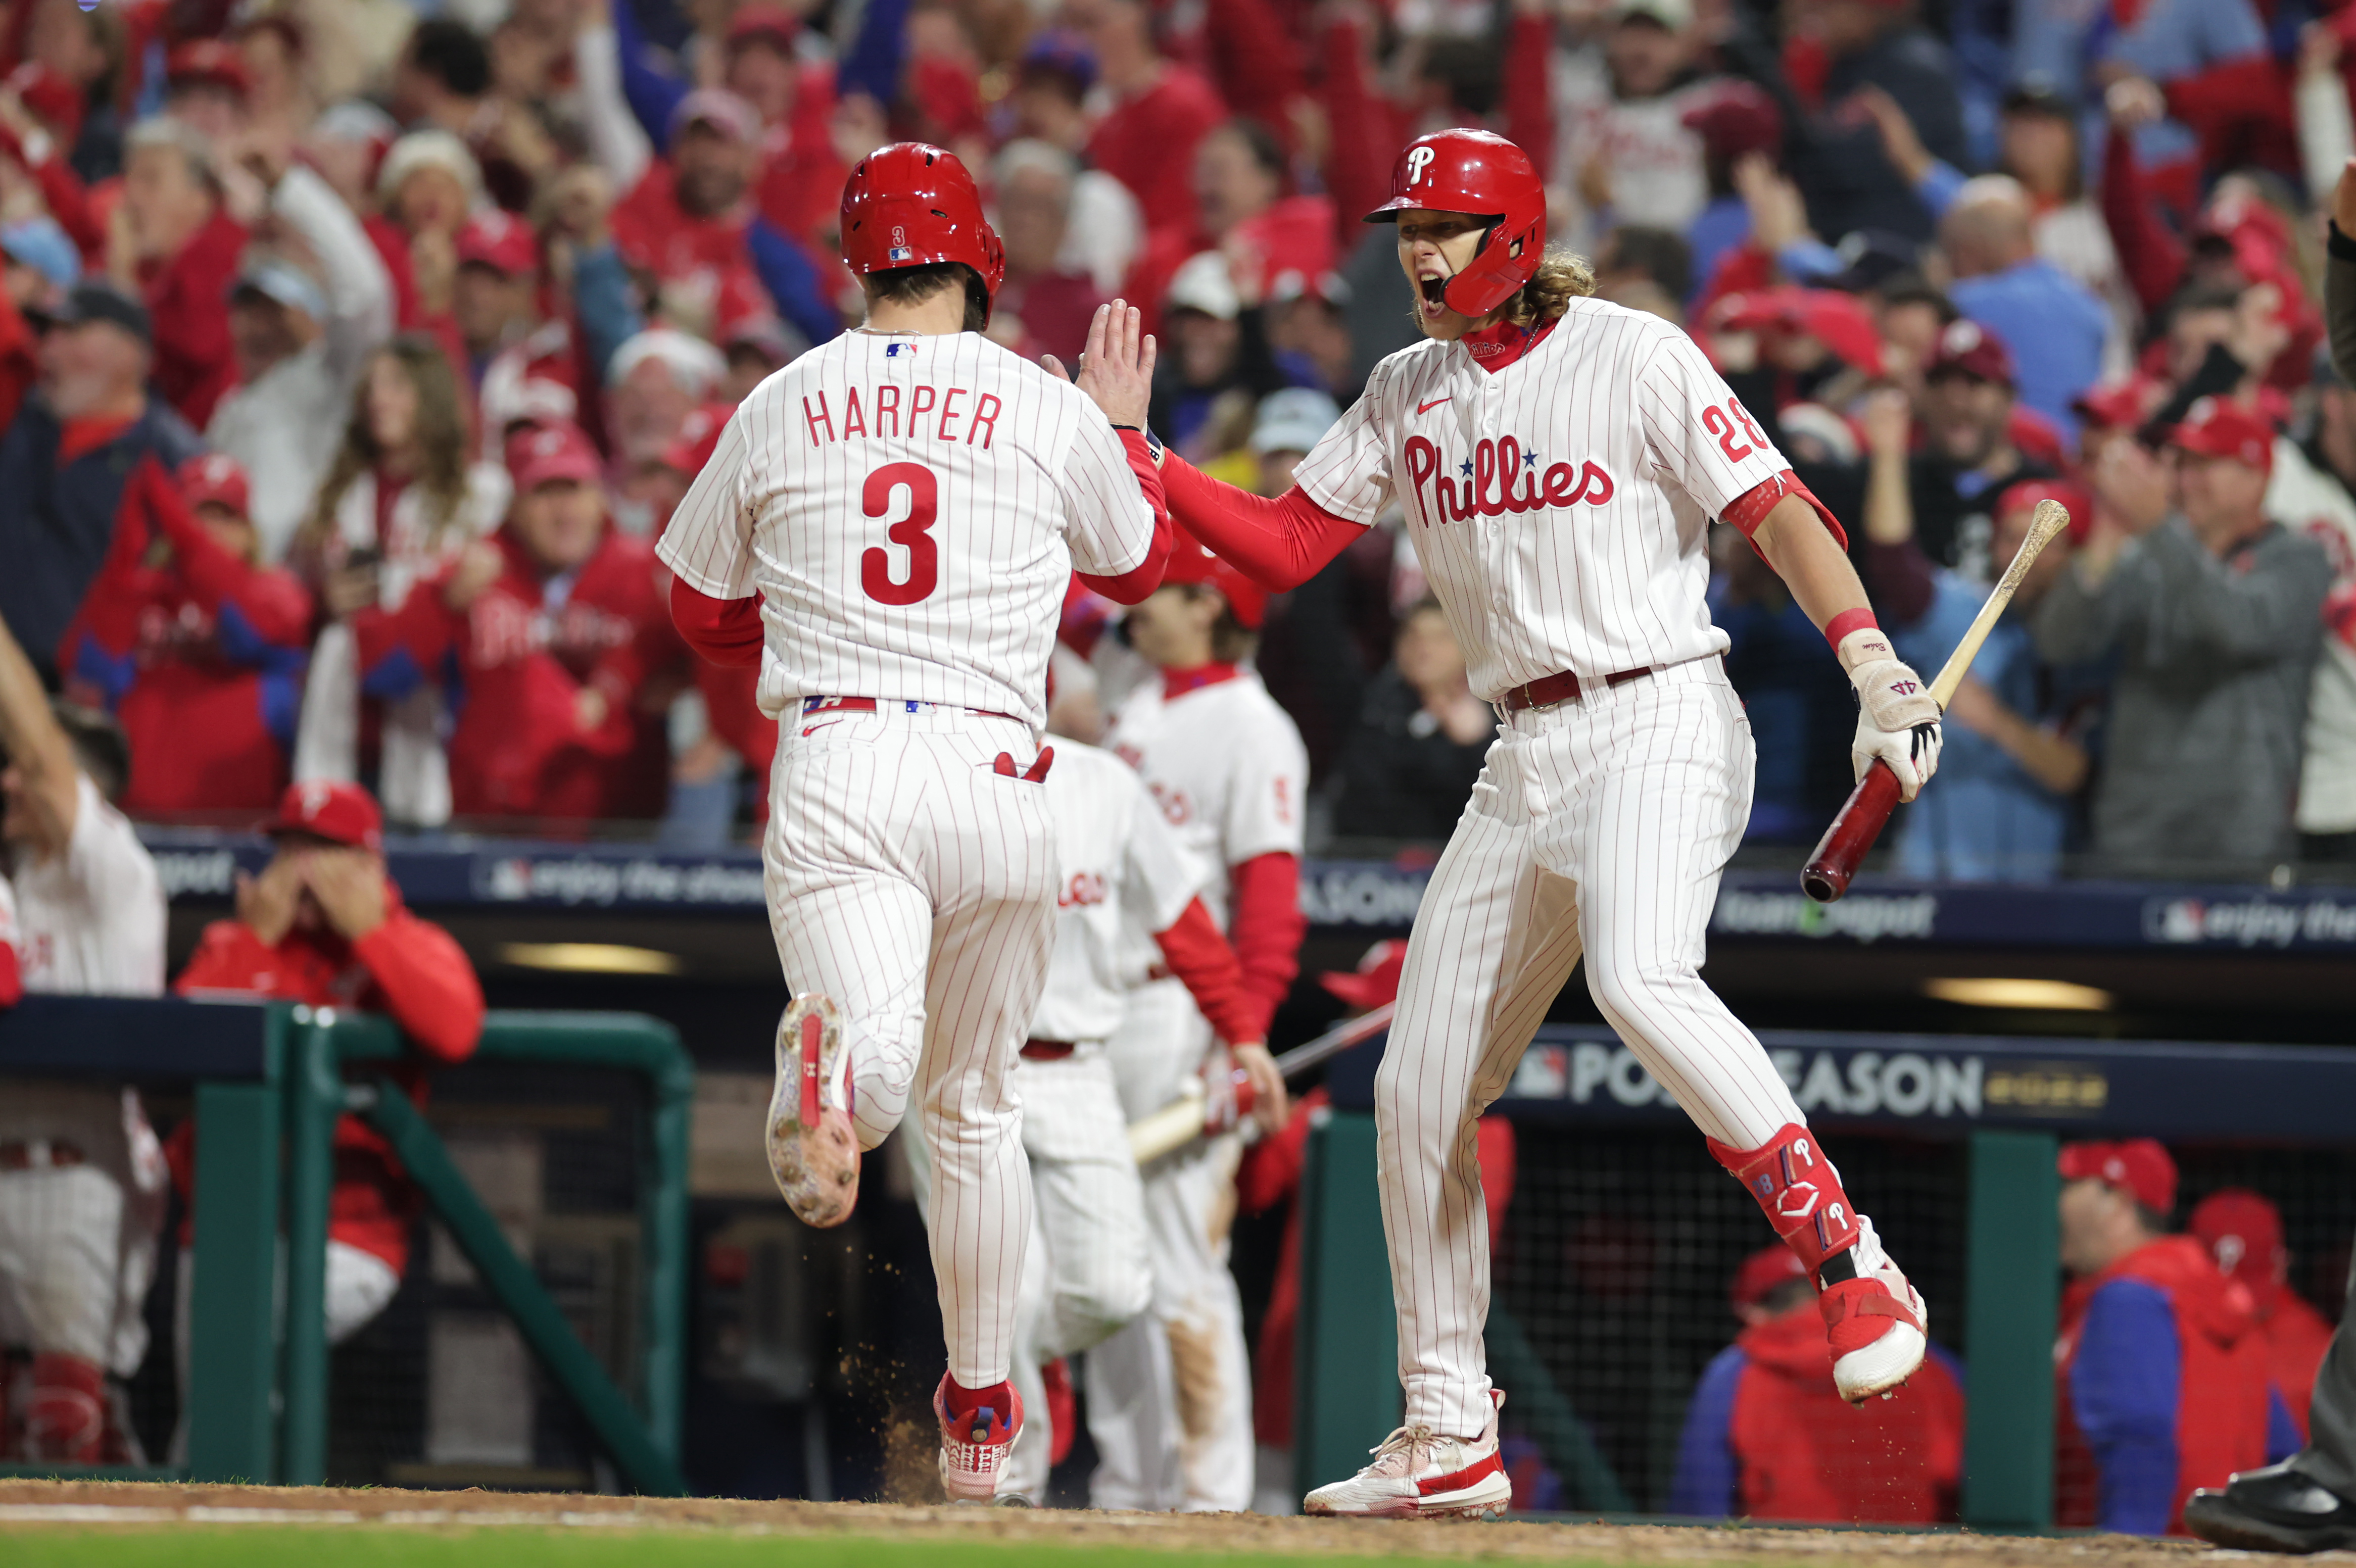 Bryce Harper's celebrations ignite Phillies fans in NLCS Game 4